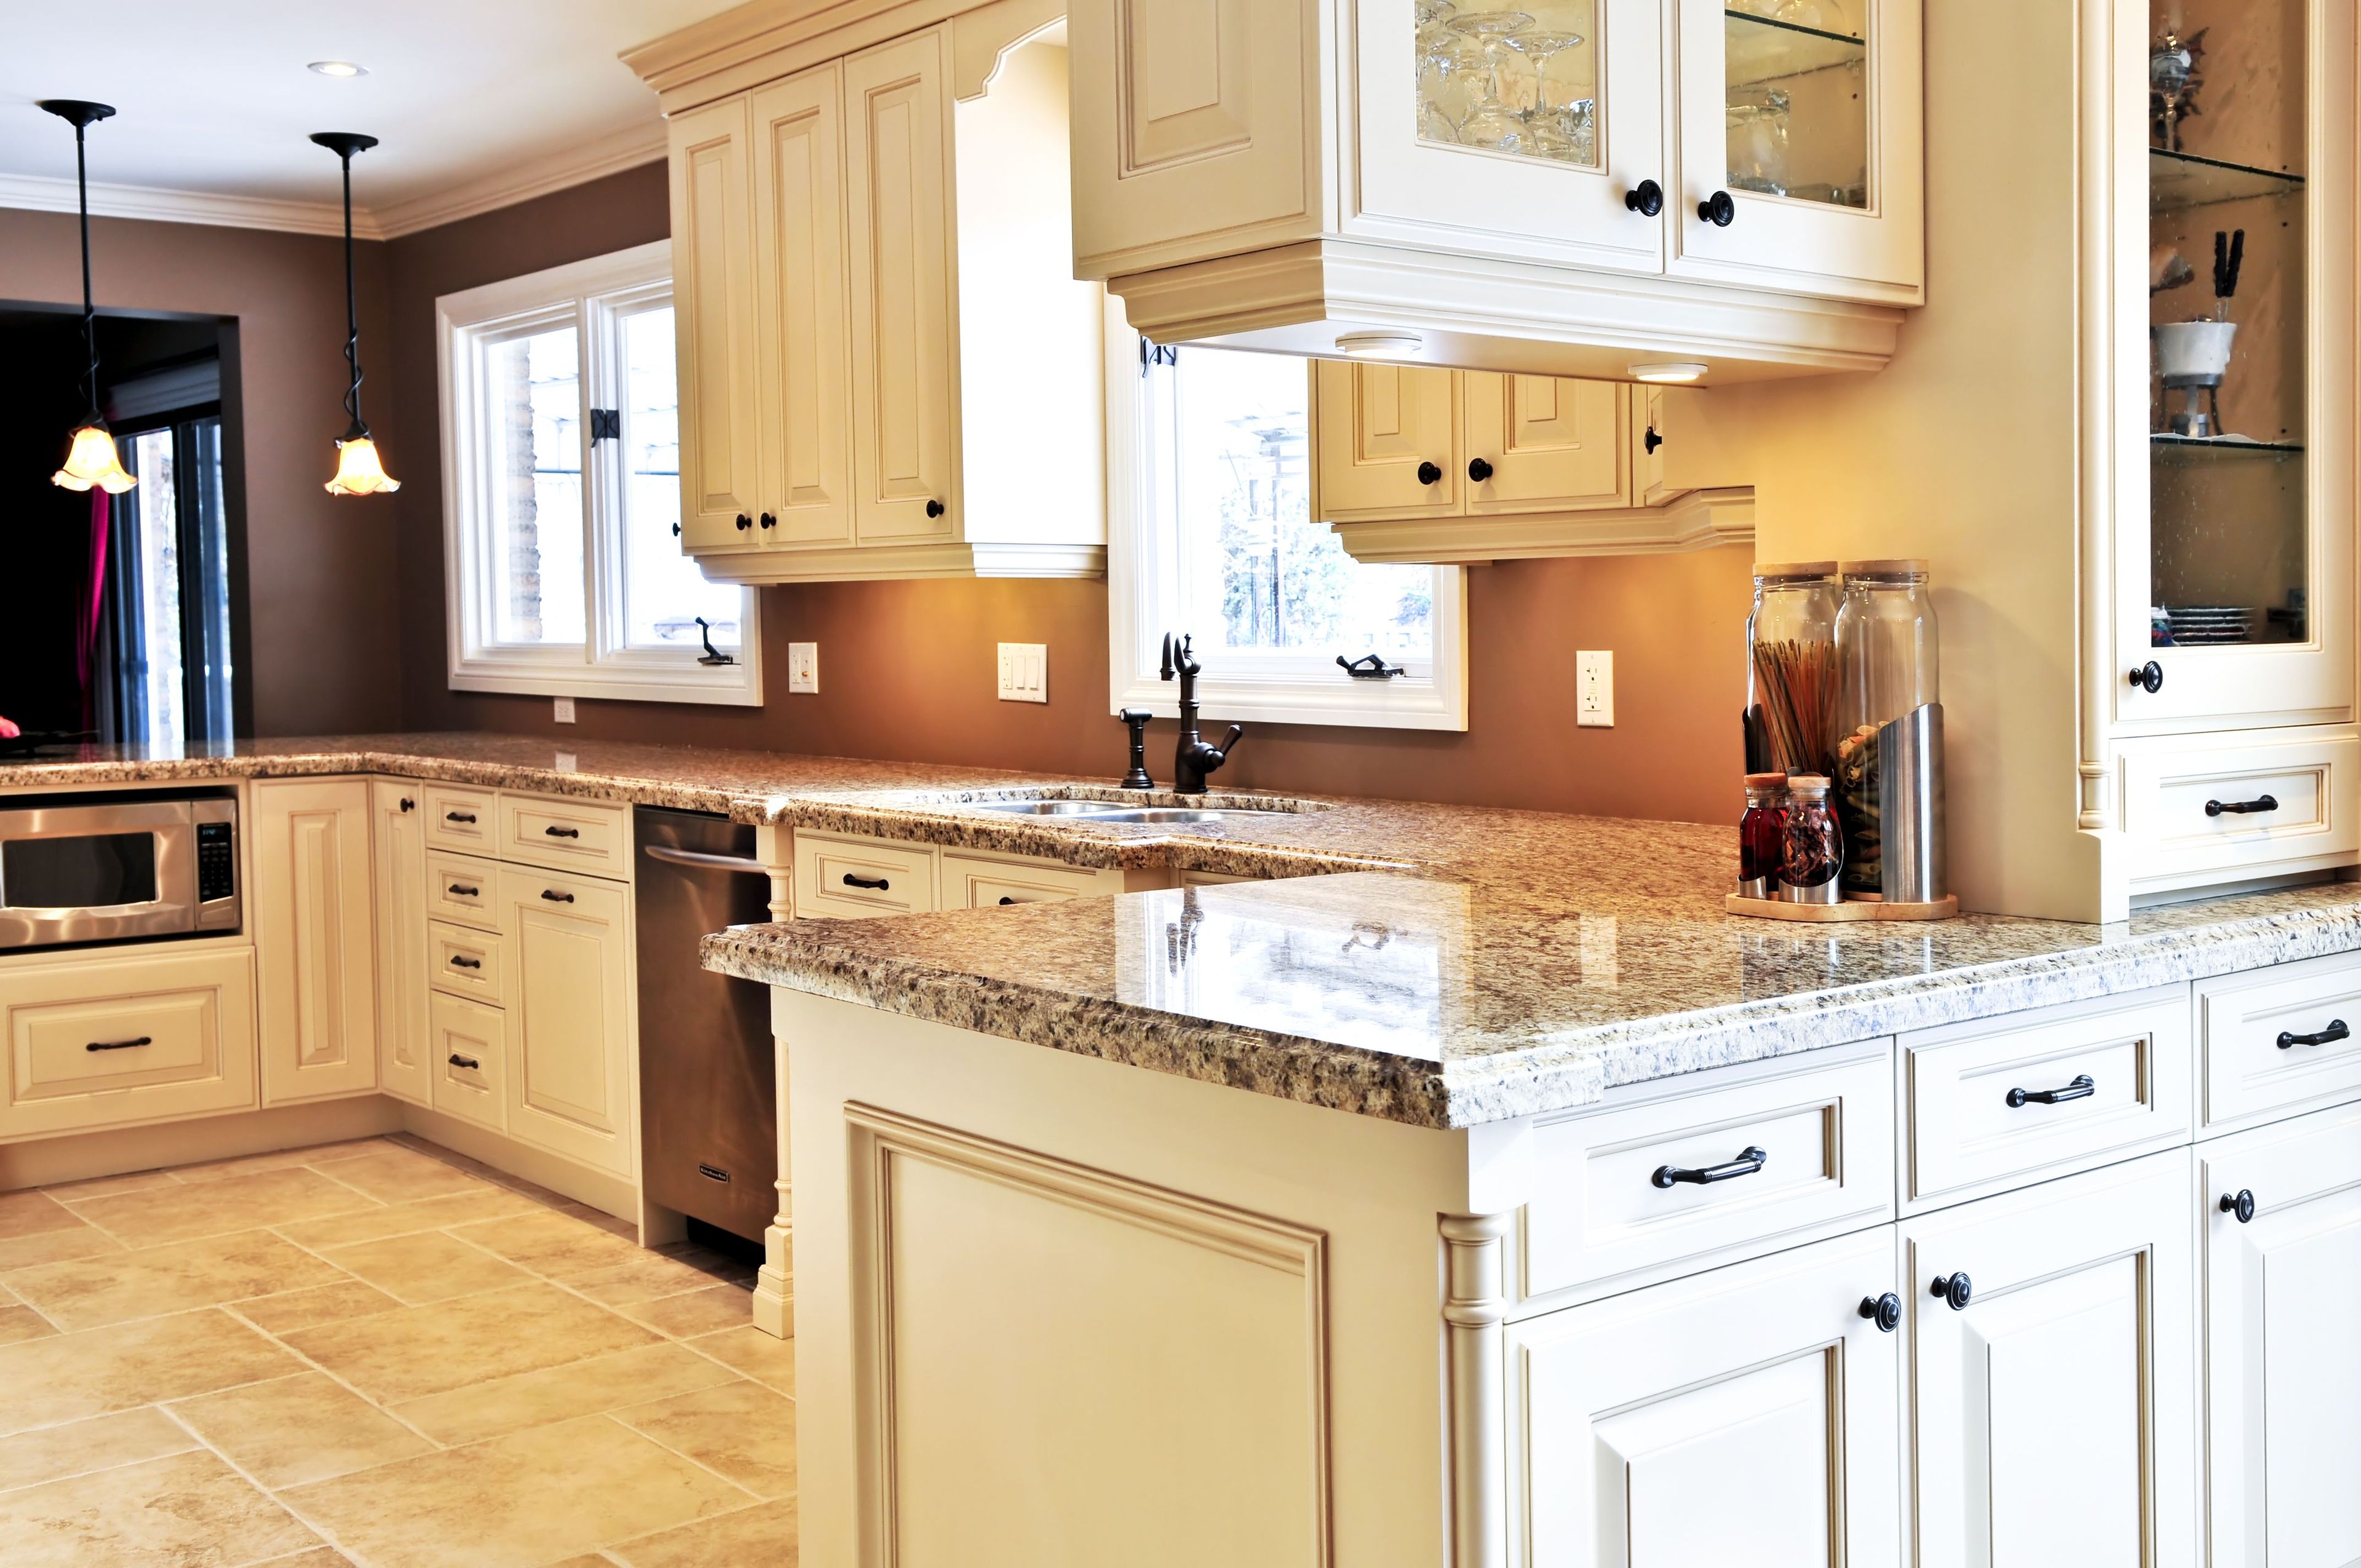 Basic Information about Kitchen Remodeling in Fort Wayne, IN